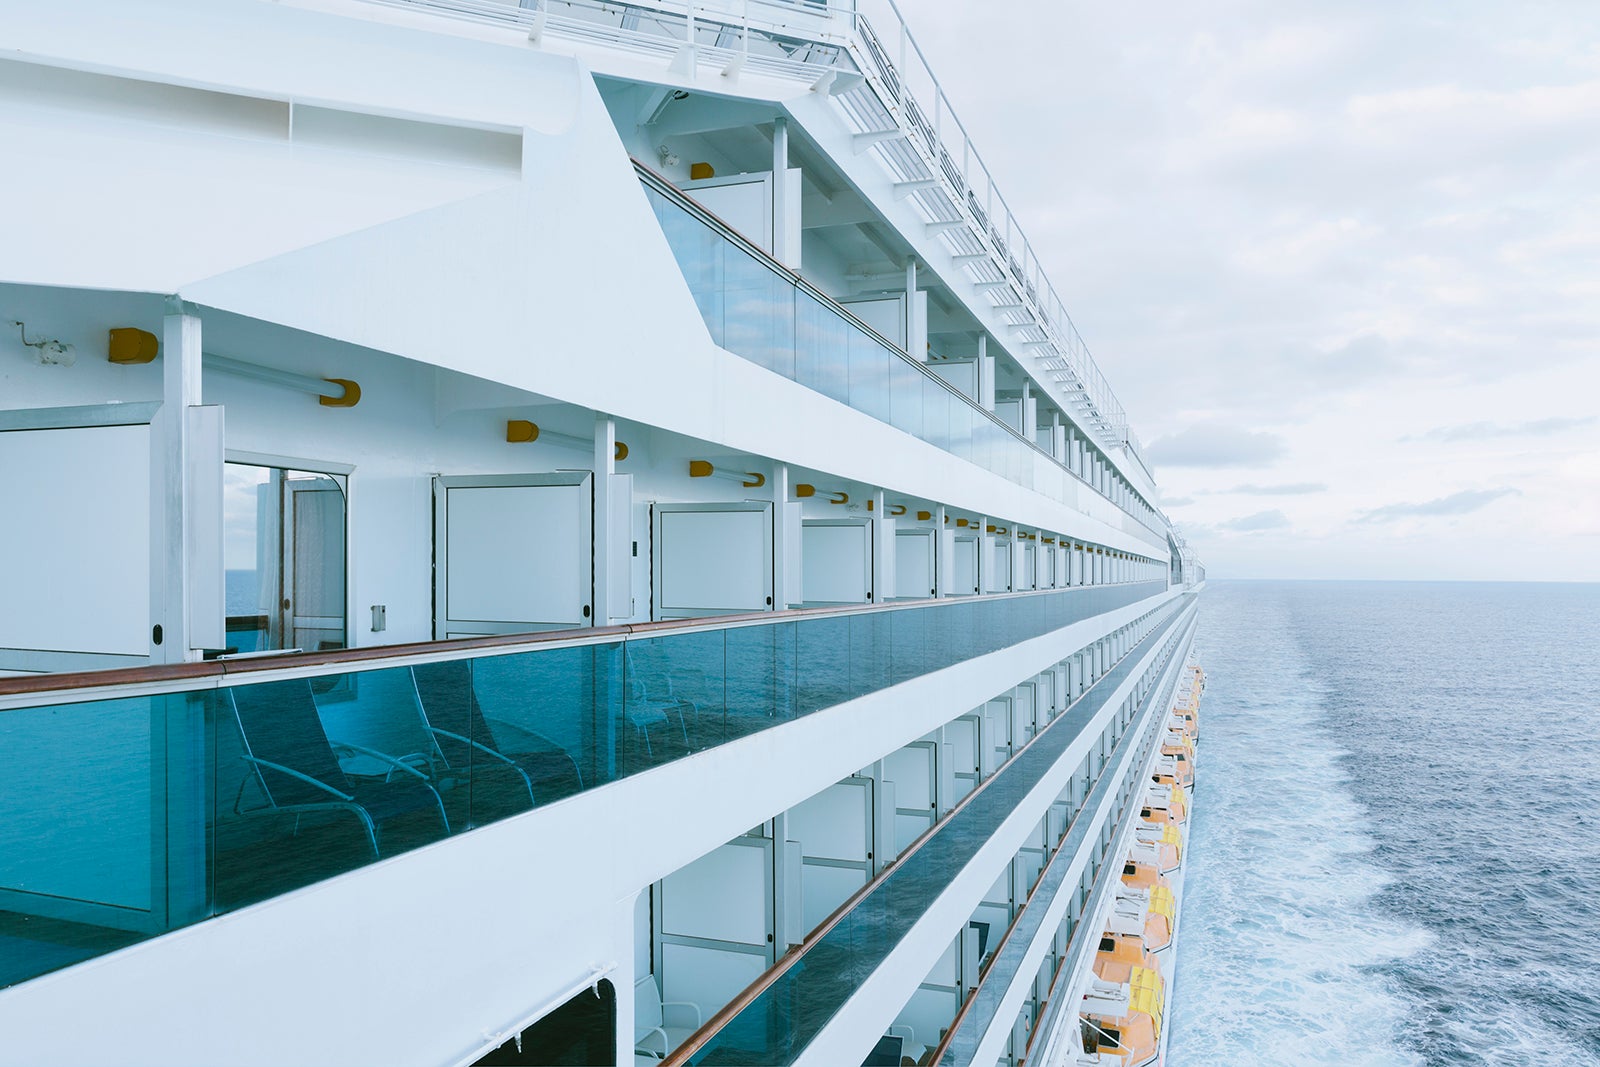 do cruise ships have balconies